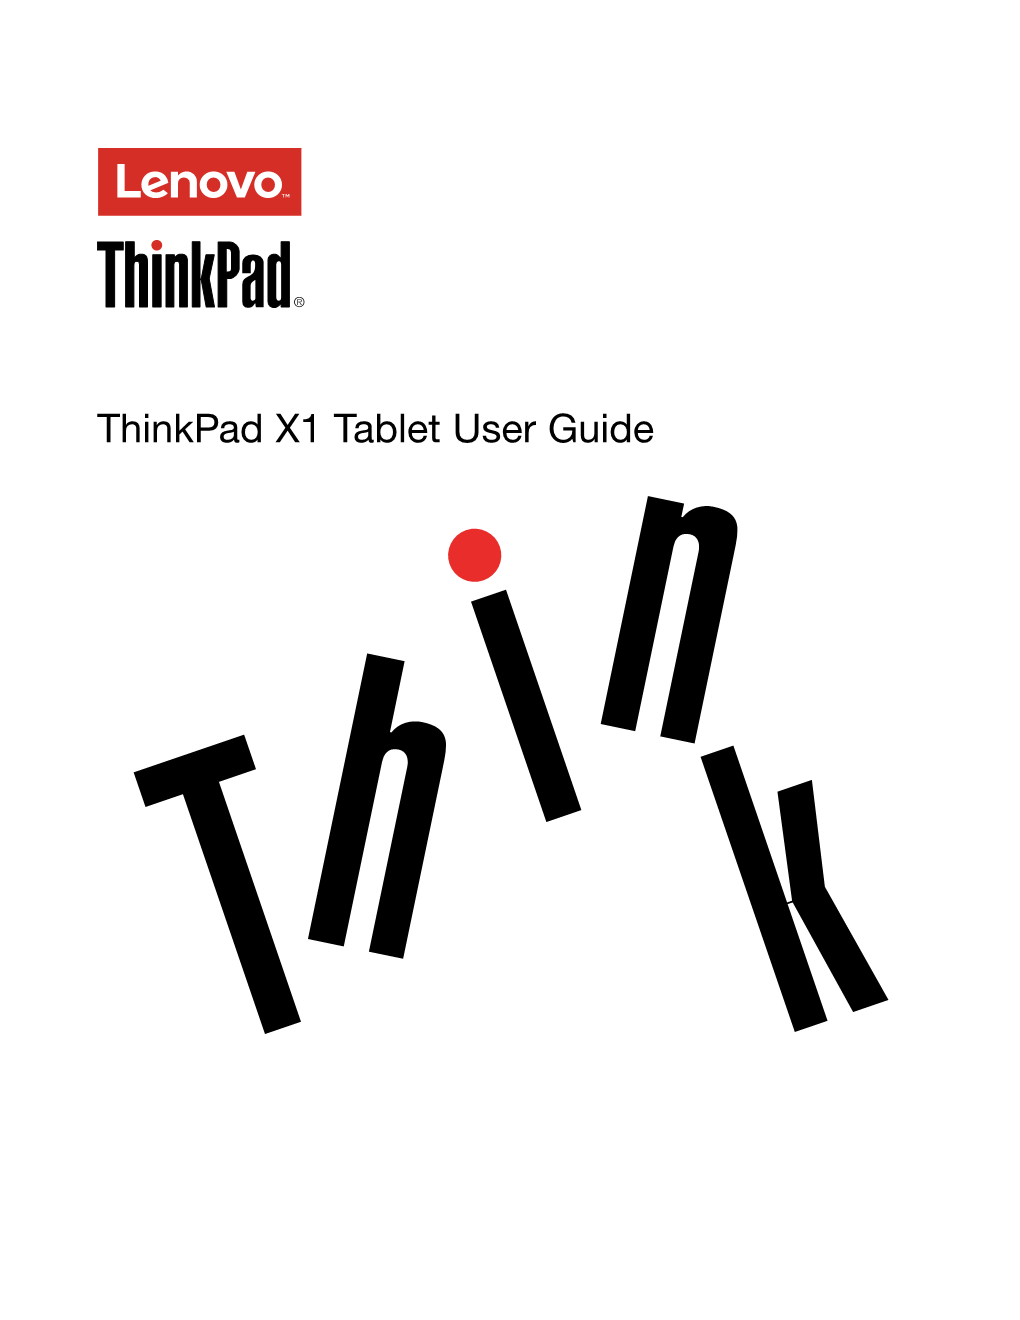 Thinkpad X1 Tablet User Guide Welcome